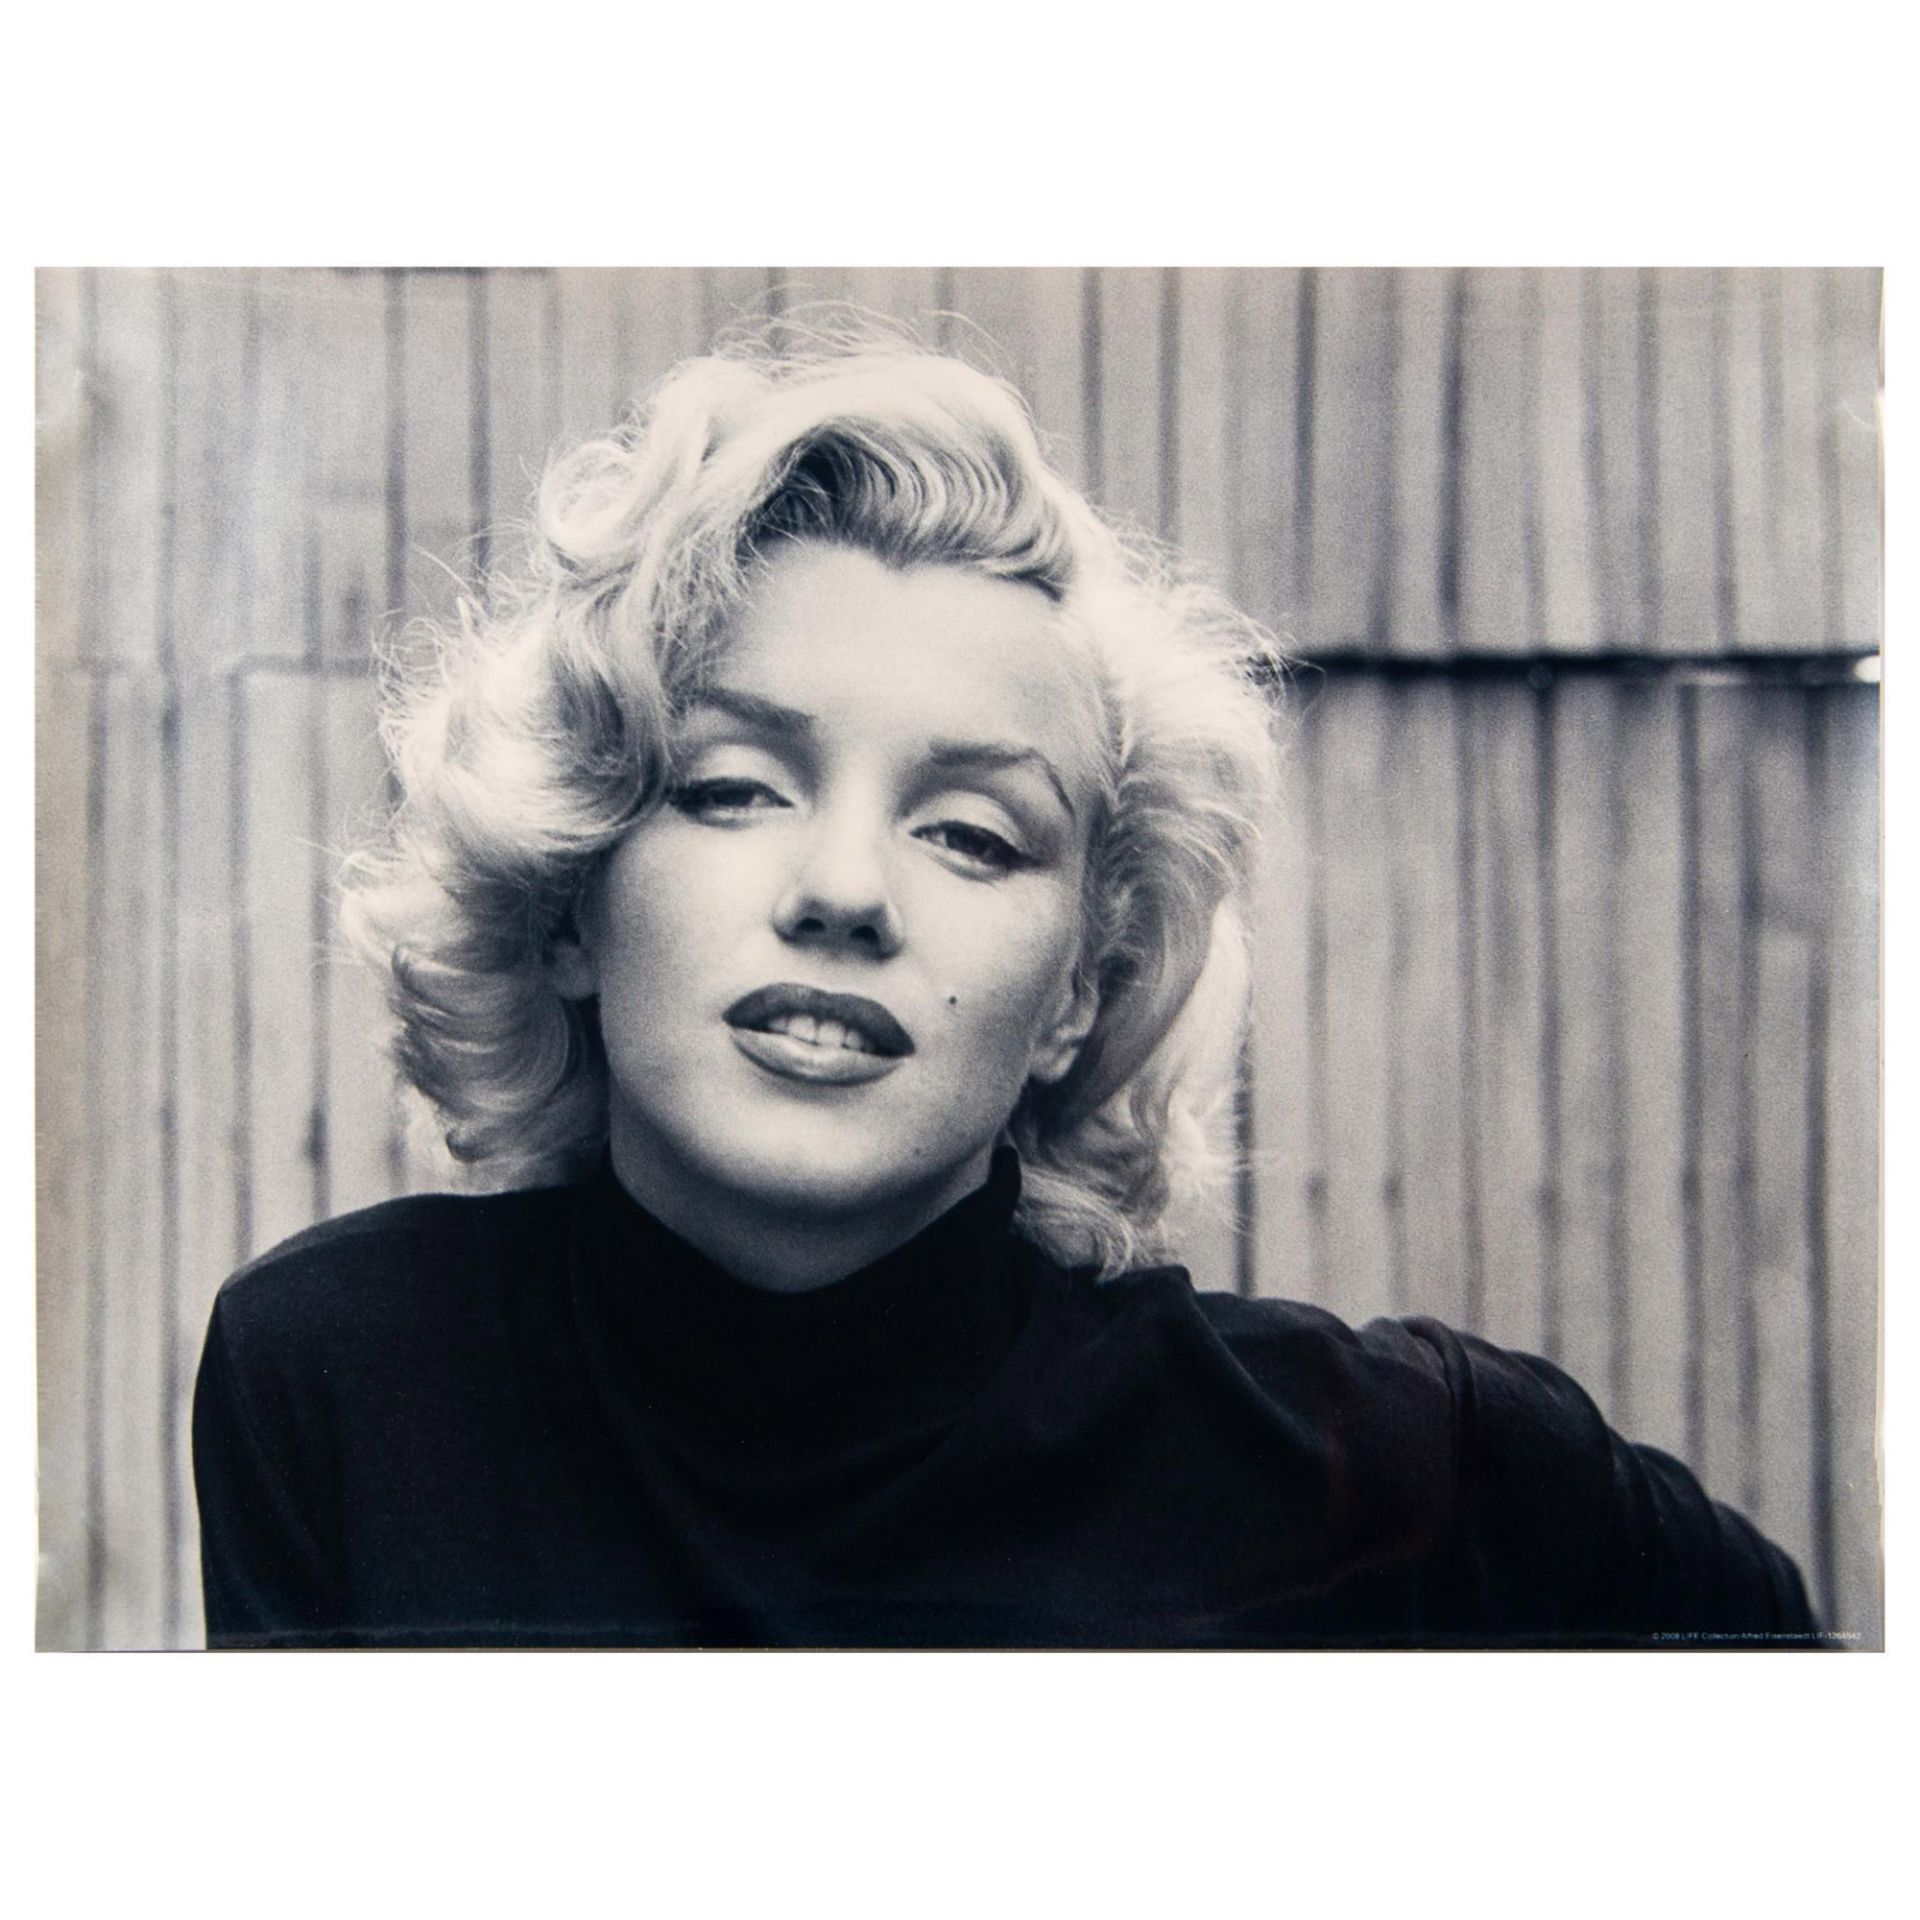 Photographic Poster Print, Marilyn Monroe at Home